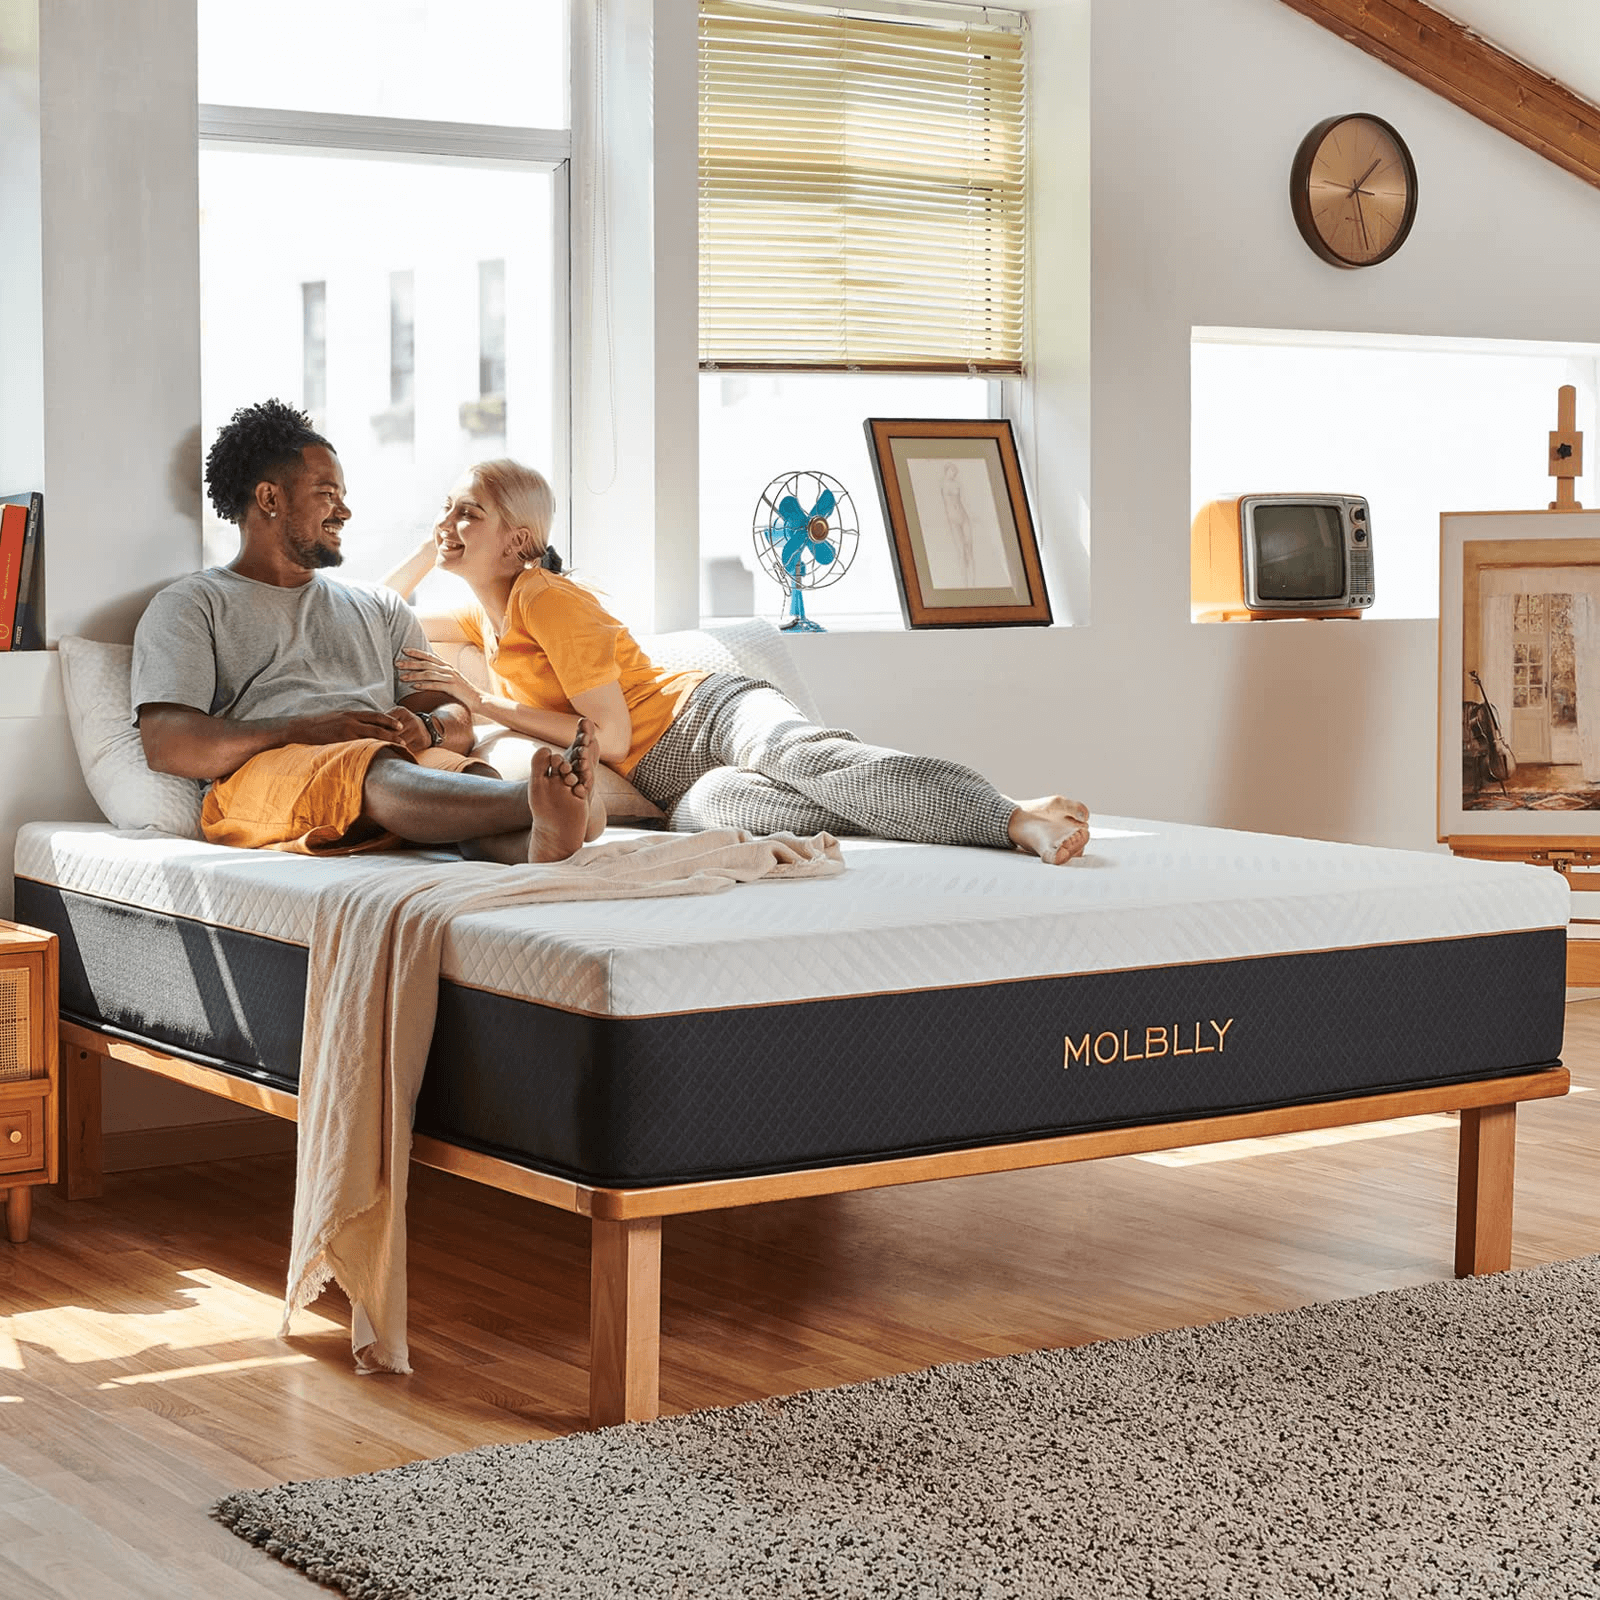 A Moblly plush layer of memory foam is suitable for back sleepers